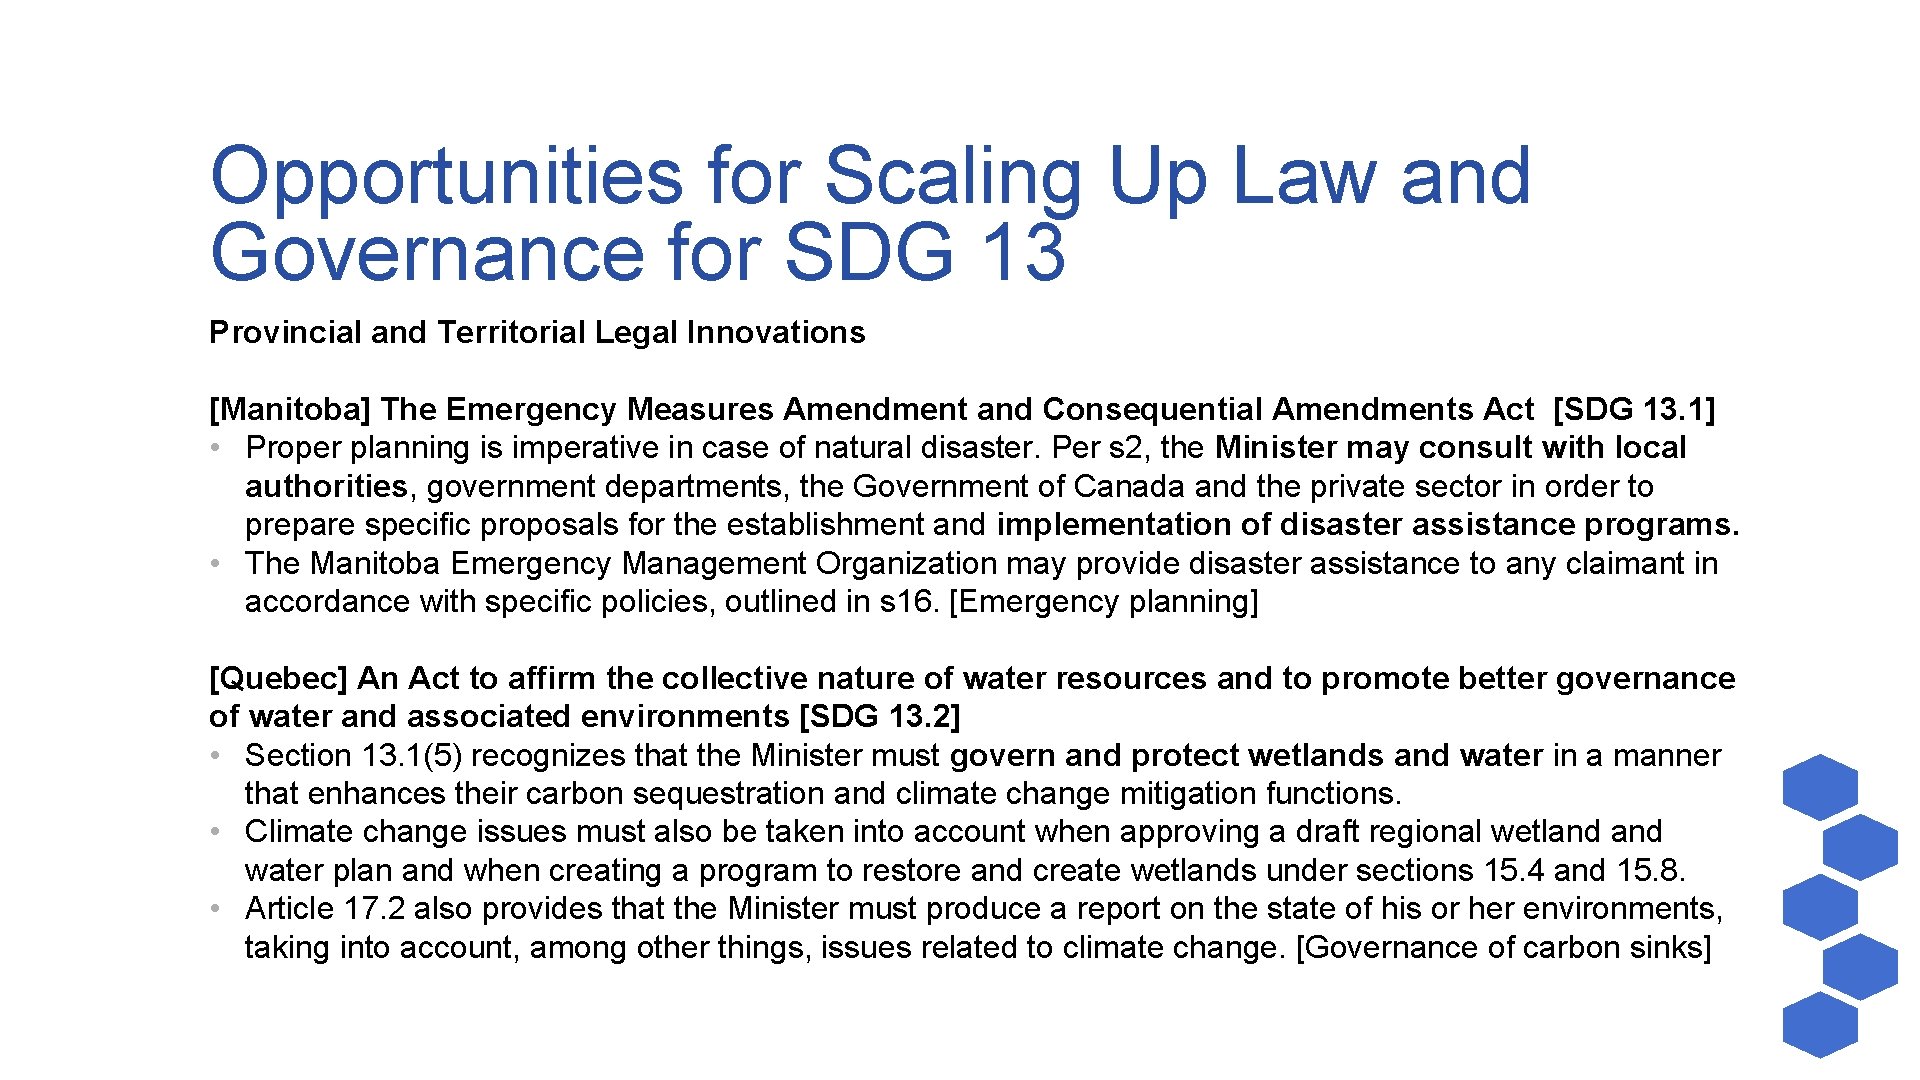 Opportunities for Scaling Up Law and Governance for SDG 13 Provincial and Territorial Legal